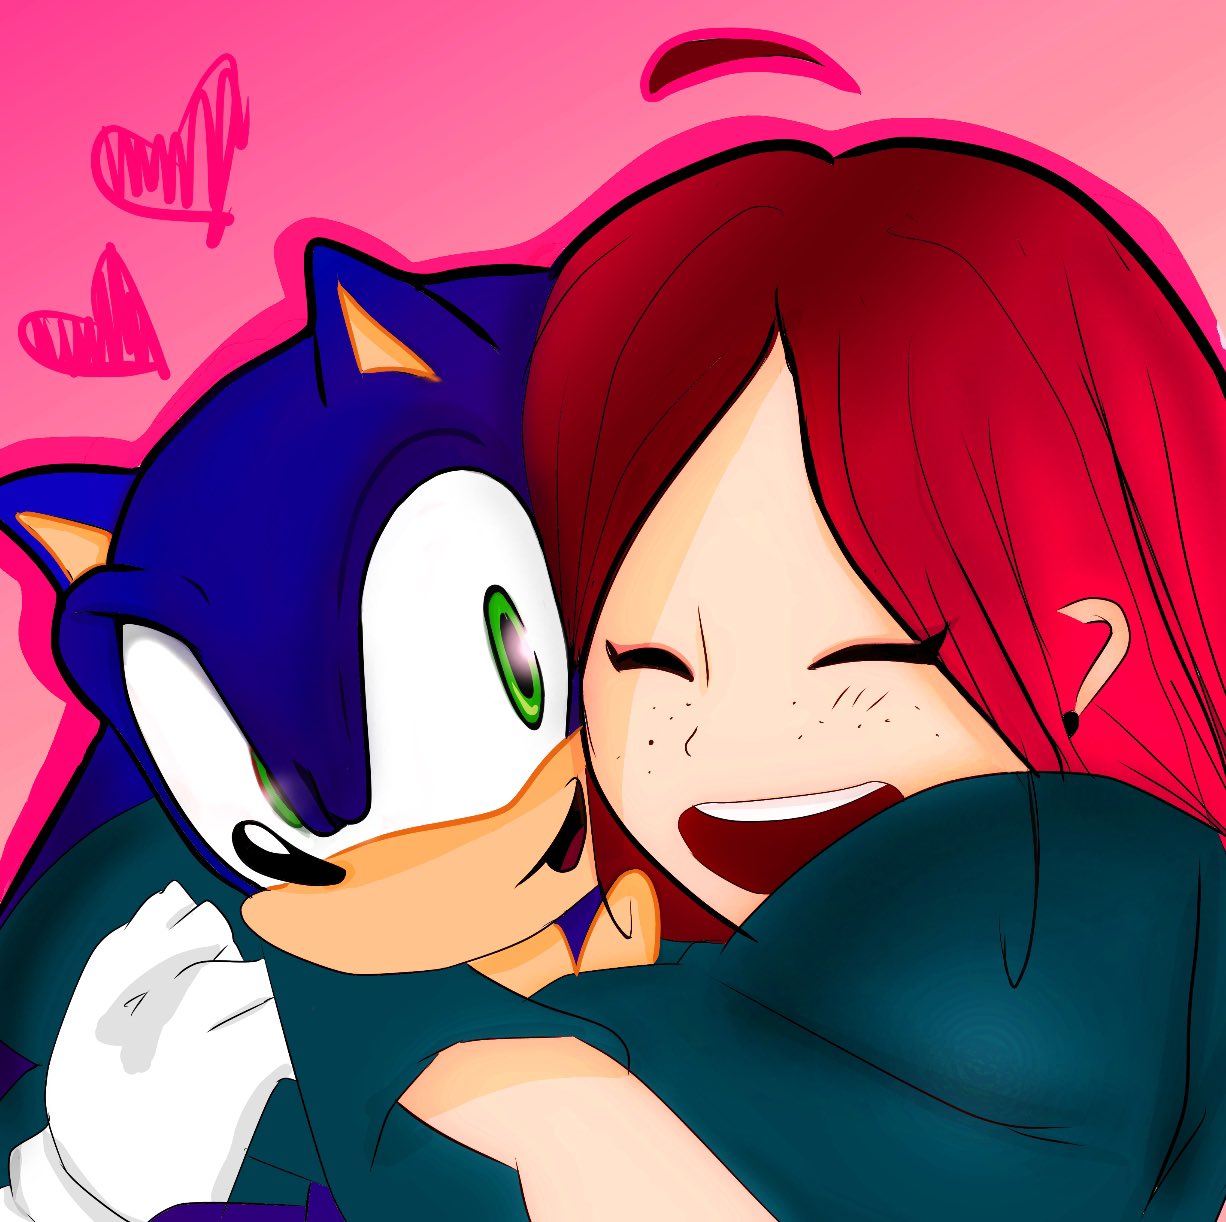 Elise and Chris hugging Sonic, Sonic the Hedgehog